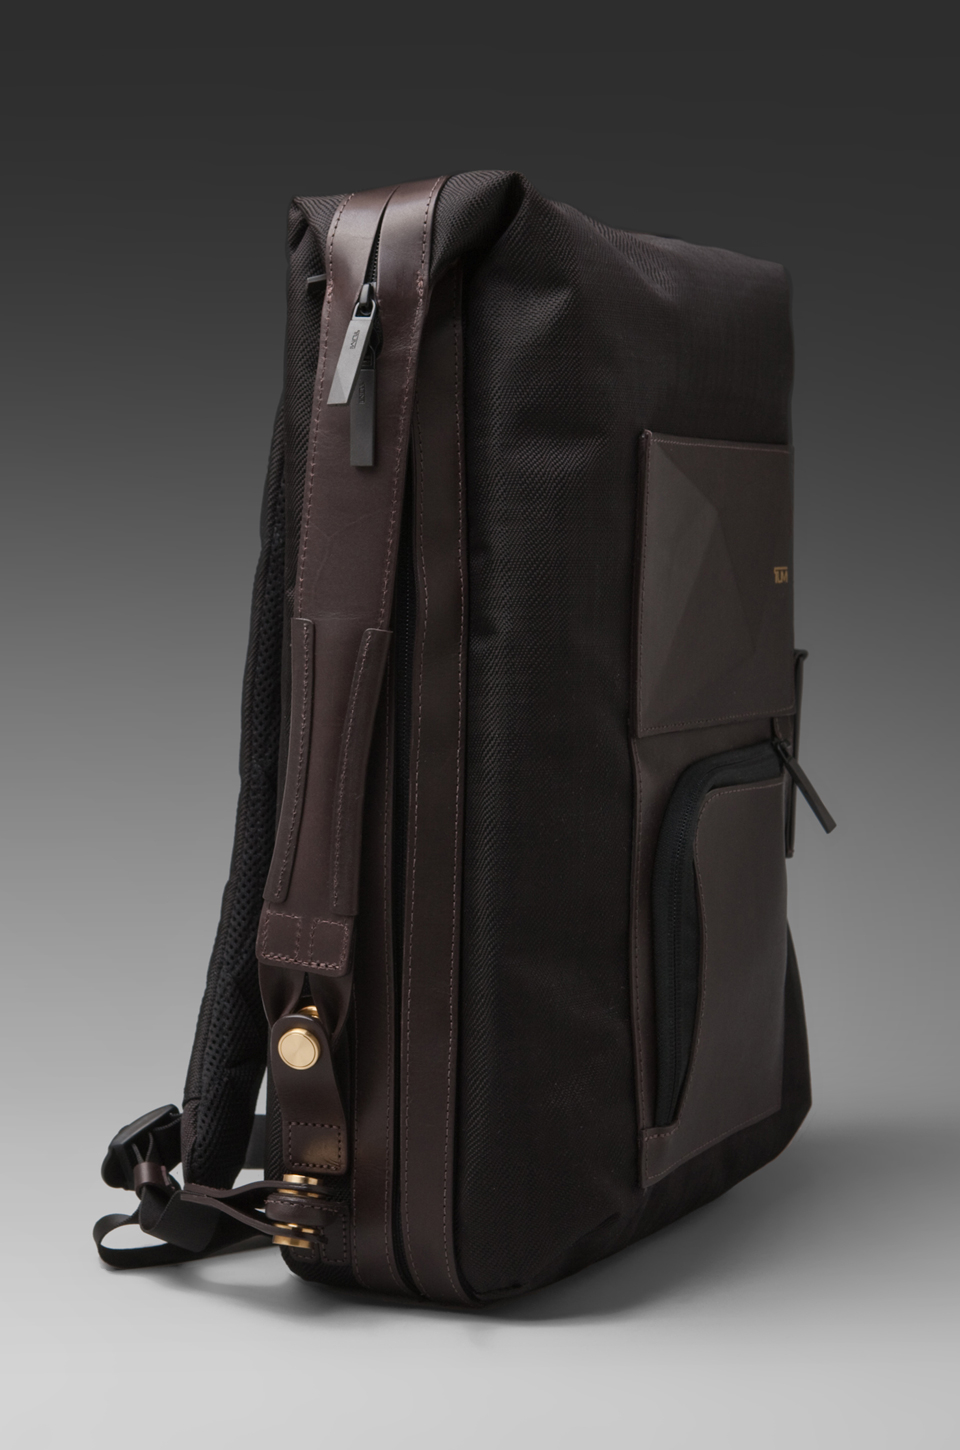 Lyst - Tumi Dror Backpack in Black for Men